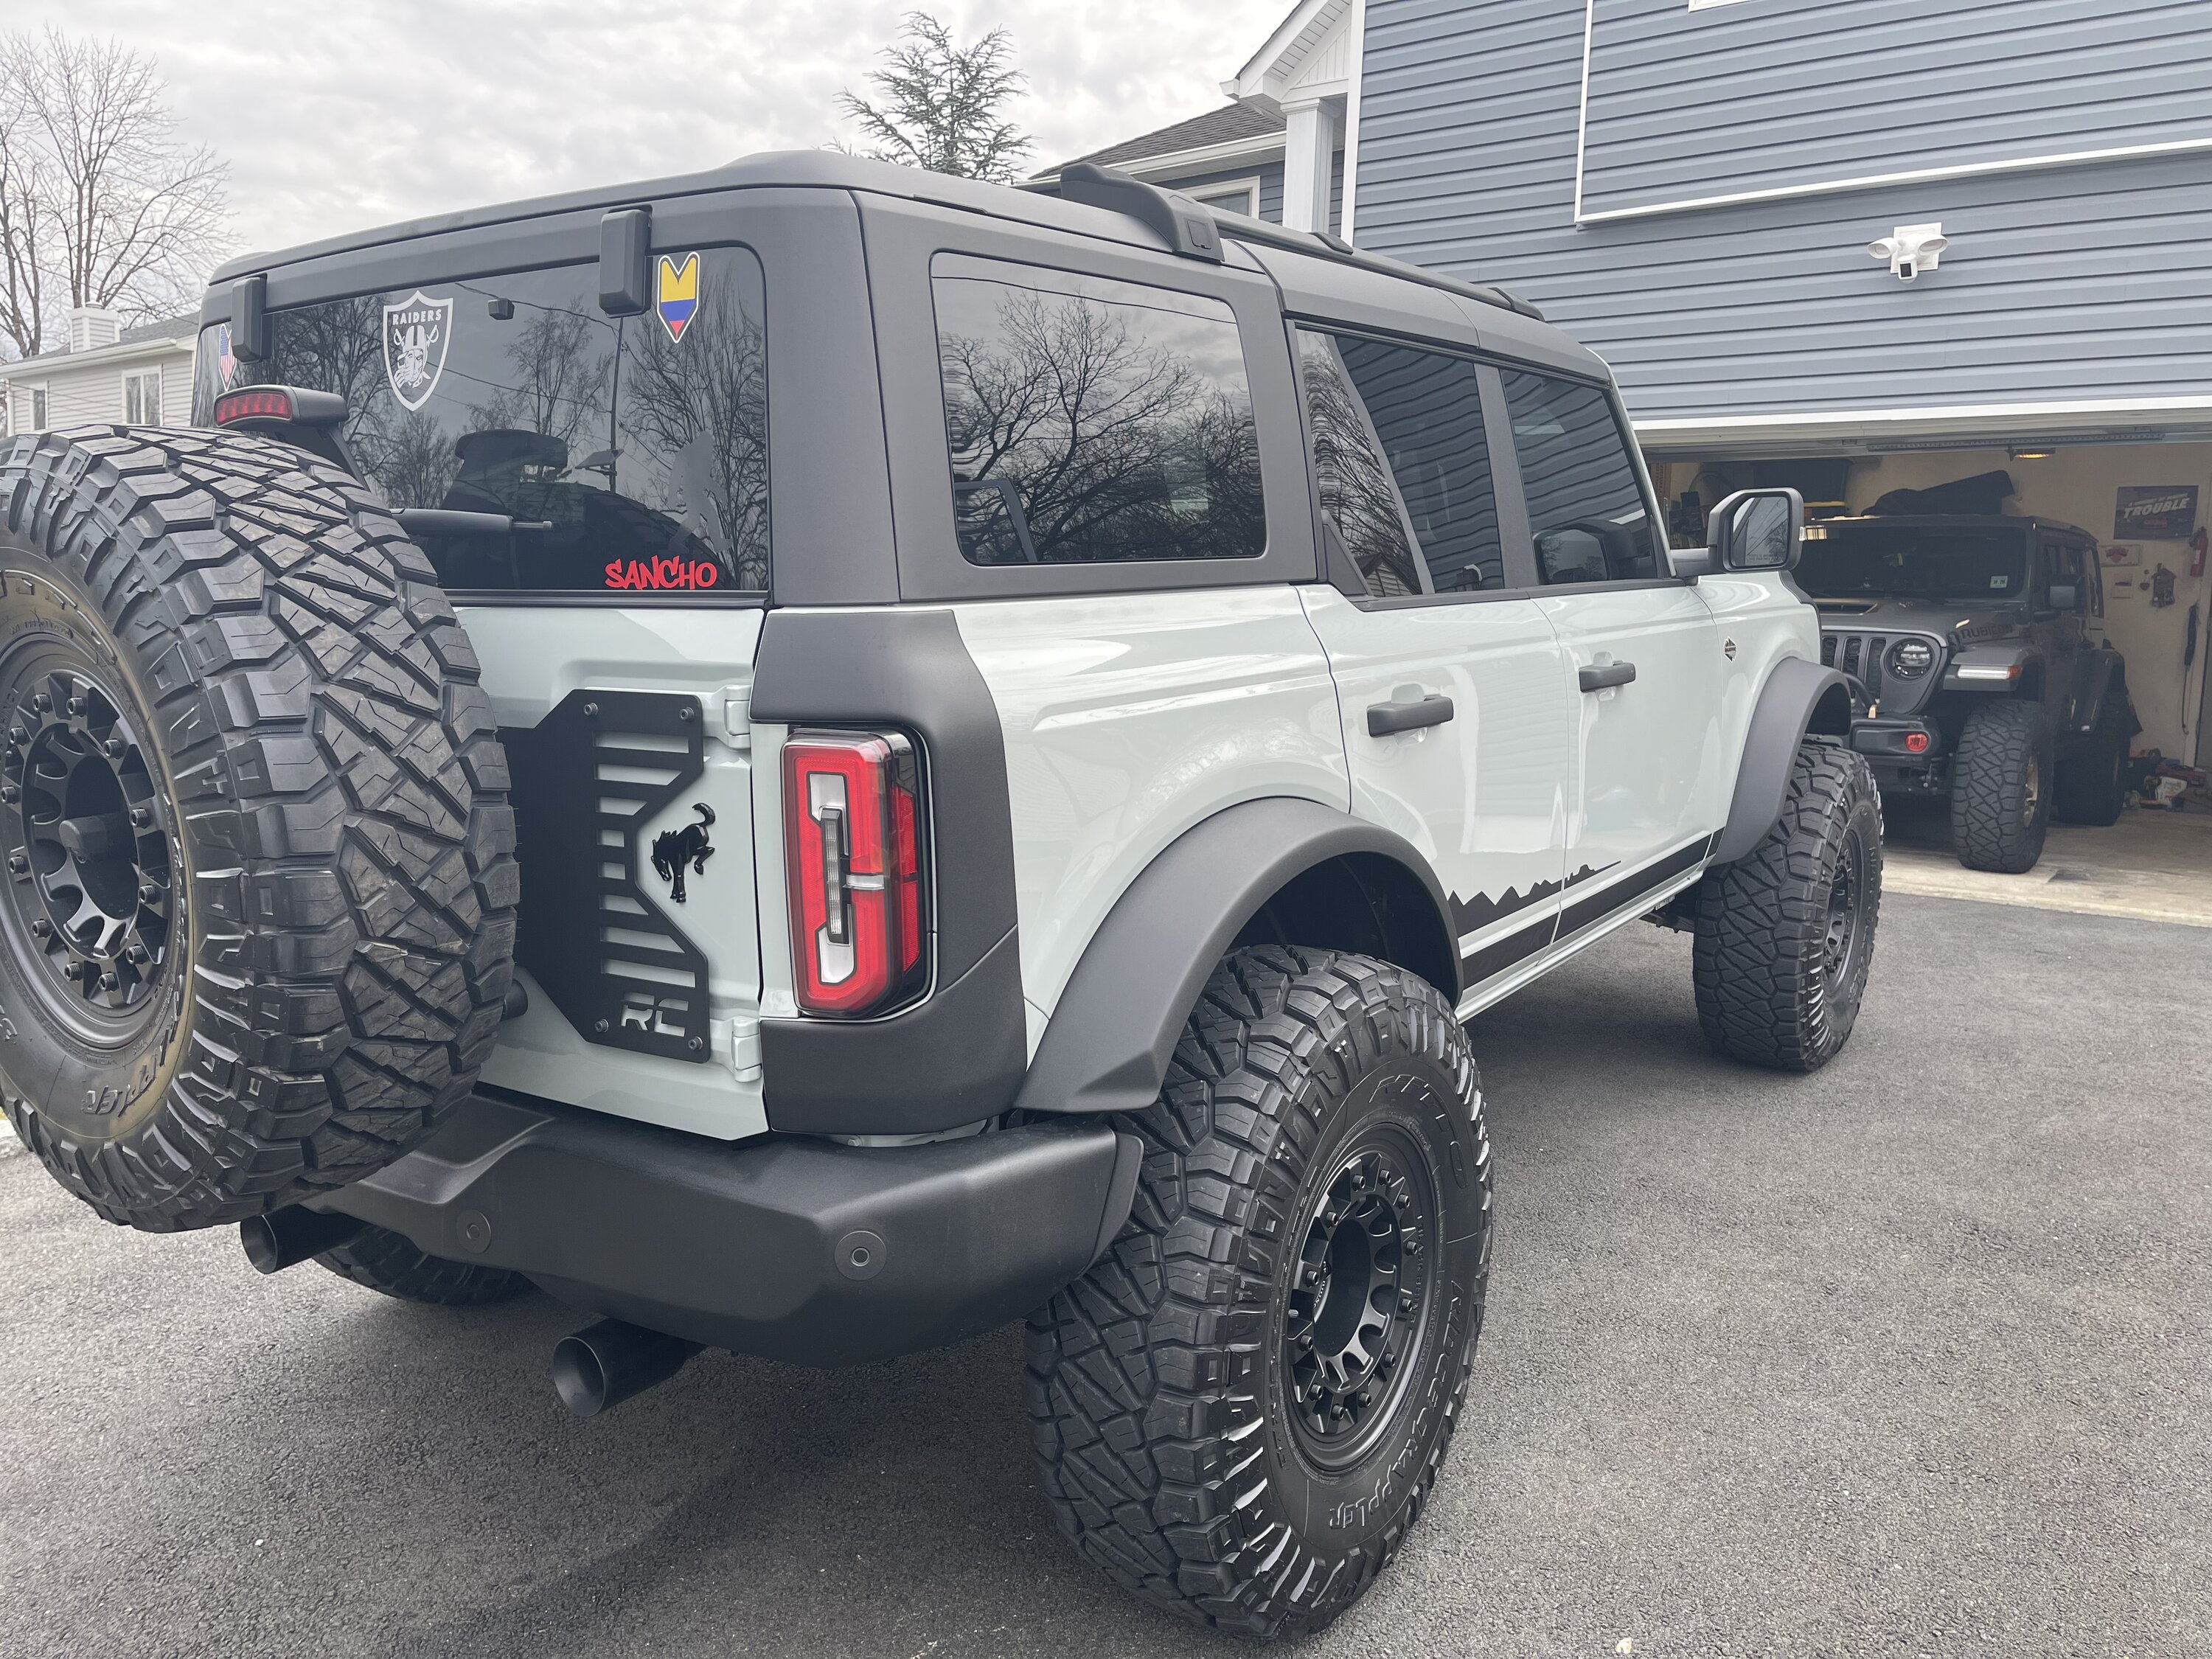 Ford Bronco Commuting with RC 2.5 Lift Kit + 37's on 2023 Wildtrak SAS? 732532D3-6AD5-4CD2-8F1F-027032626928